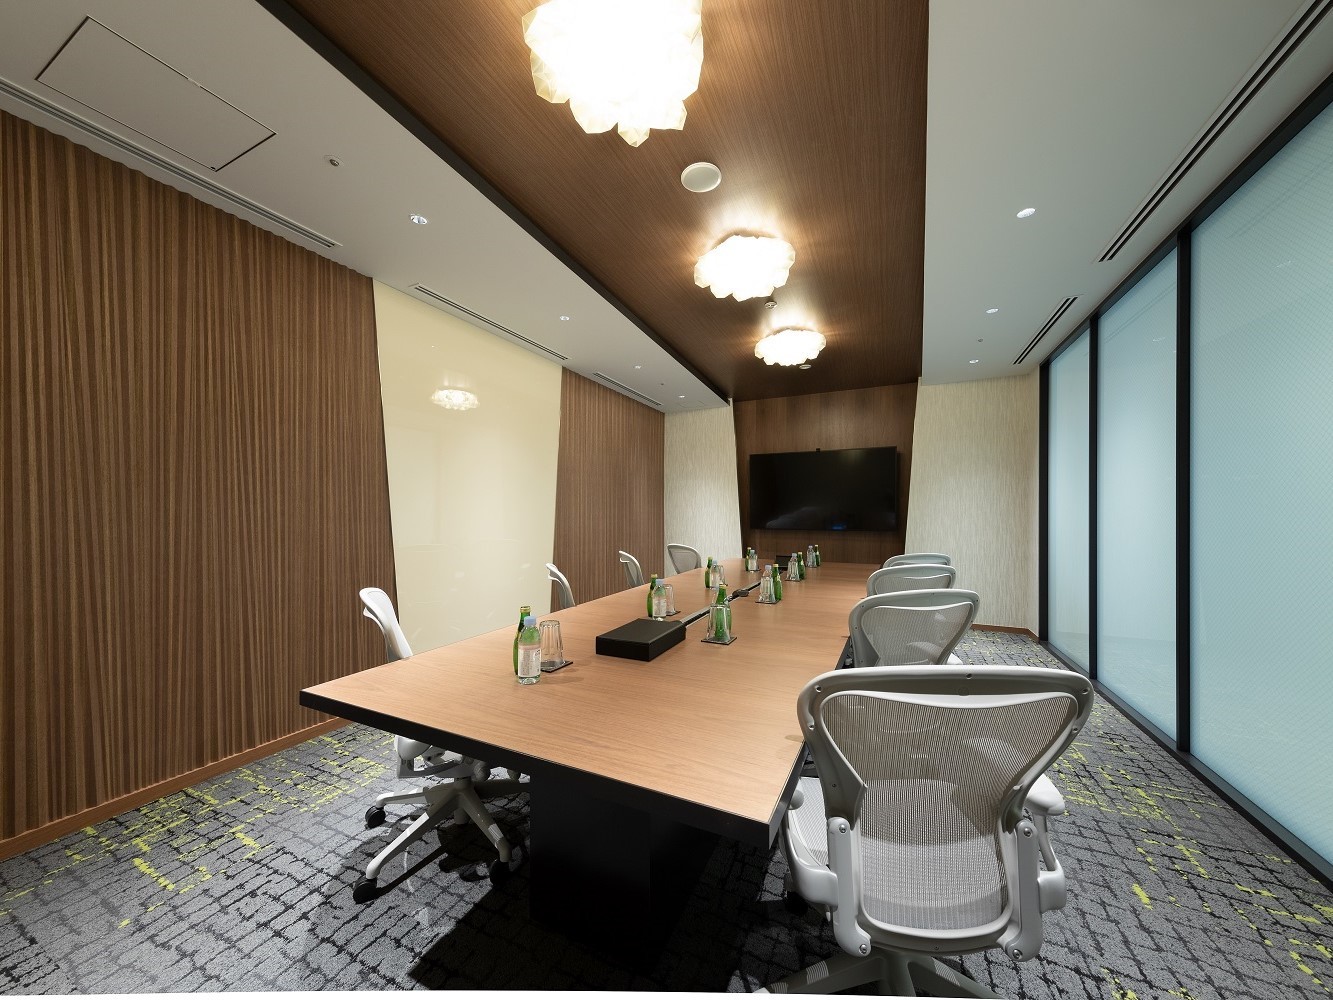 Common Area_The conference room can be freely used for various purposes such as internal meetings, meetings with customers, etc.